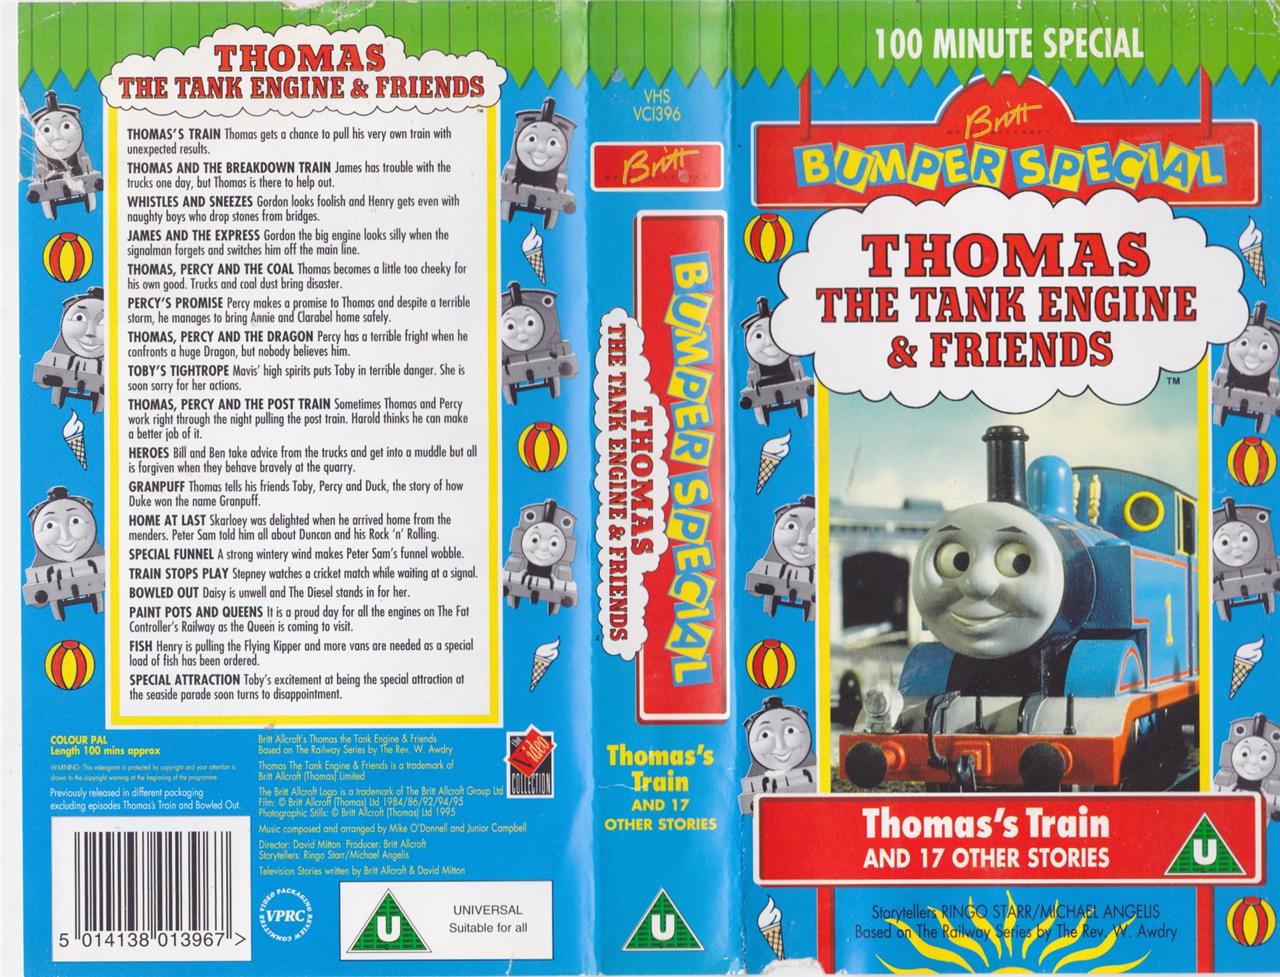 THOMAS THE TANK ENGINE 17 OTHER STORIES BUMPER EDITION VHS VIDEO PAL A ...